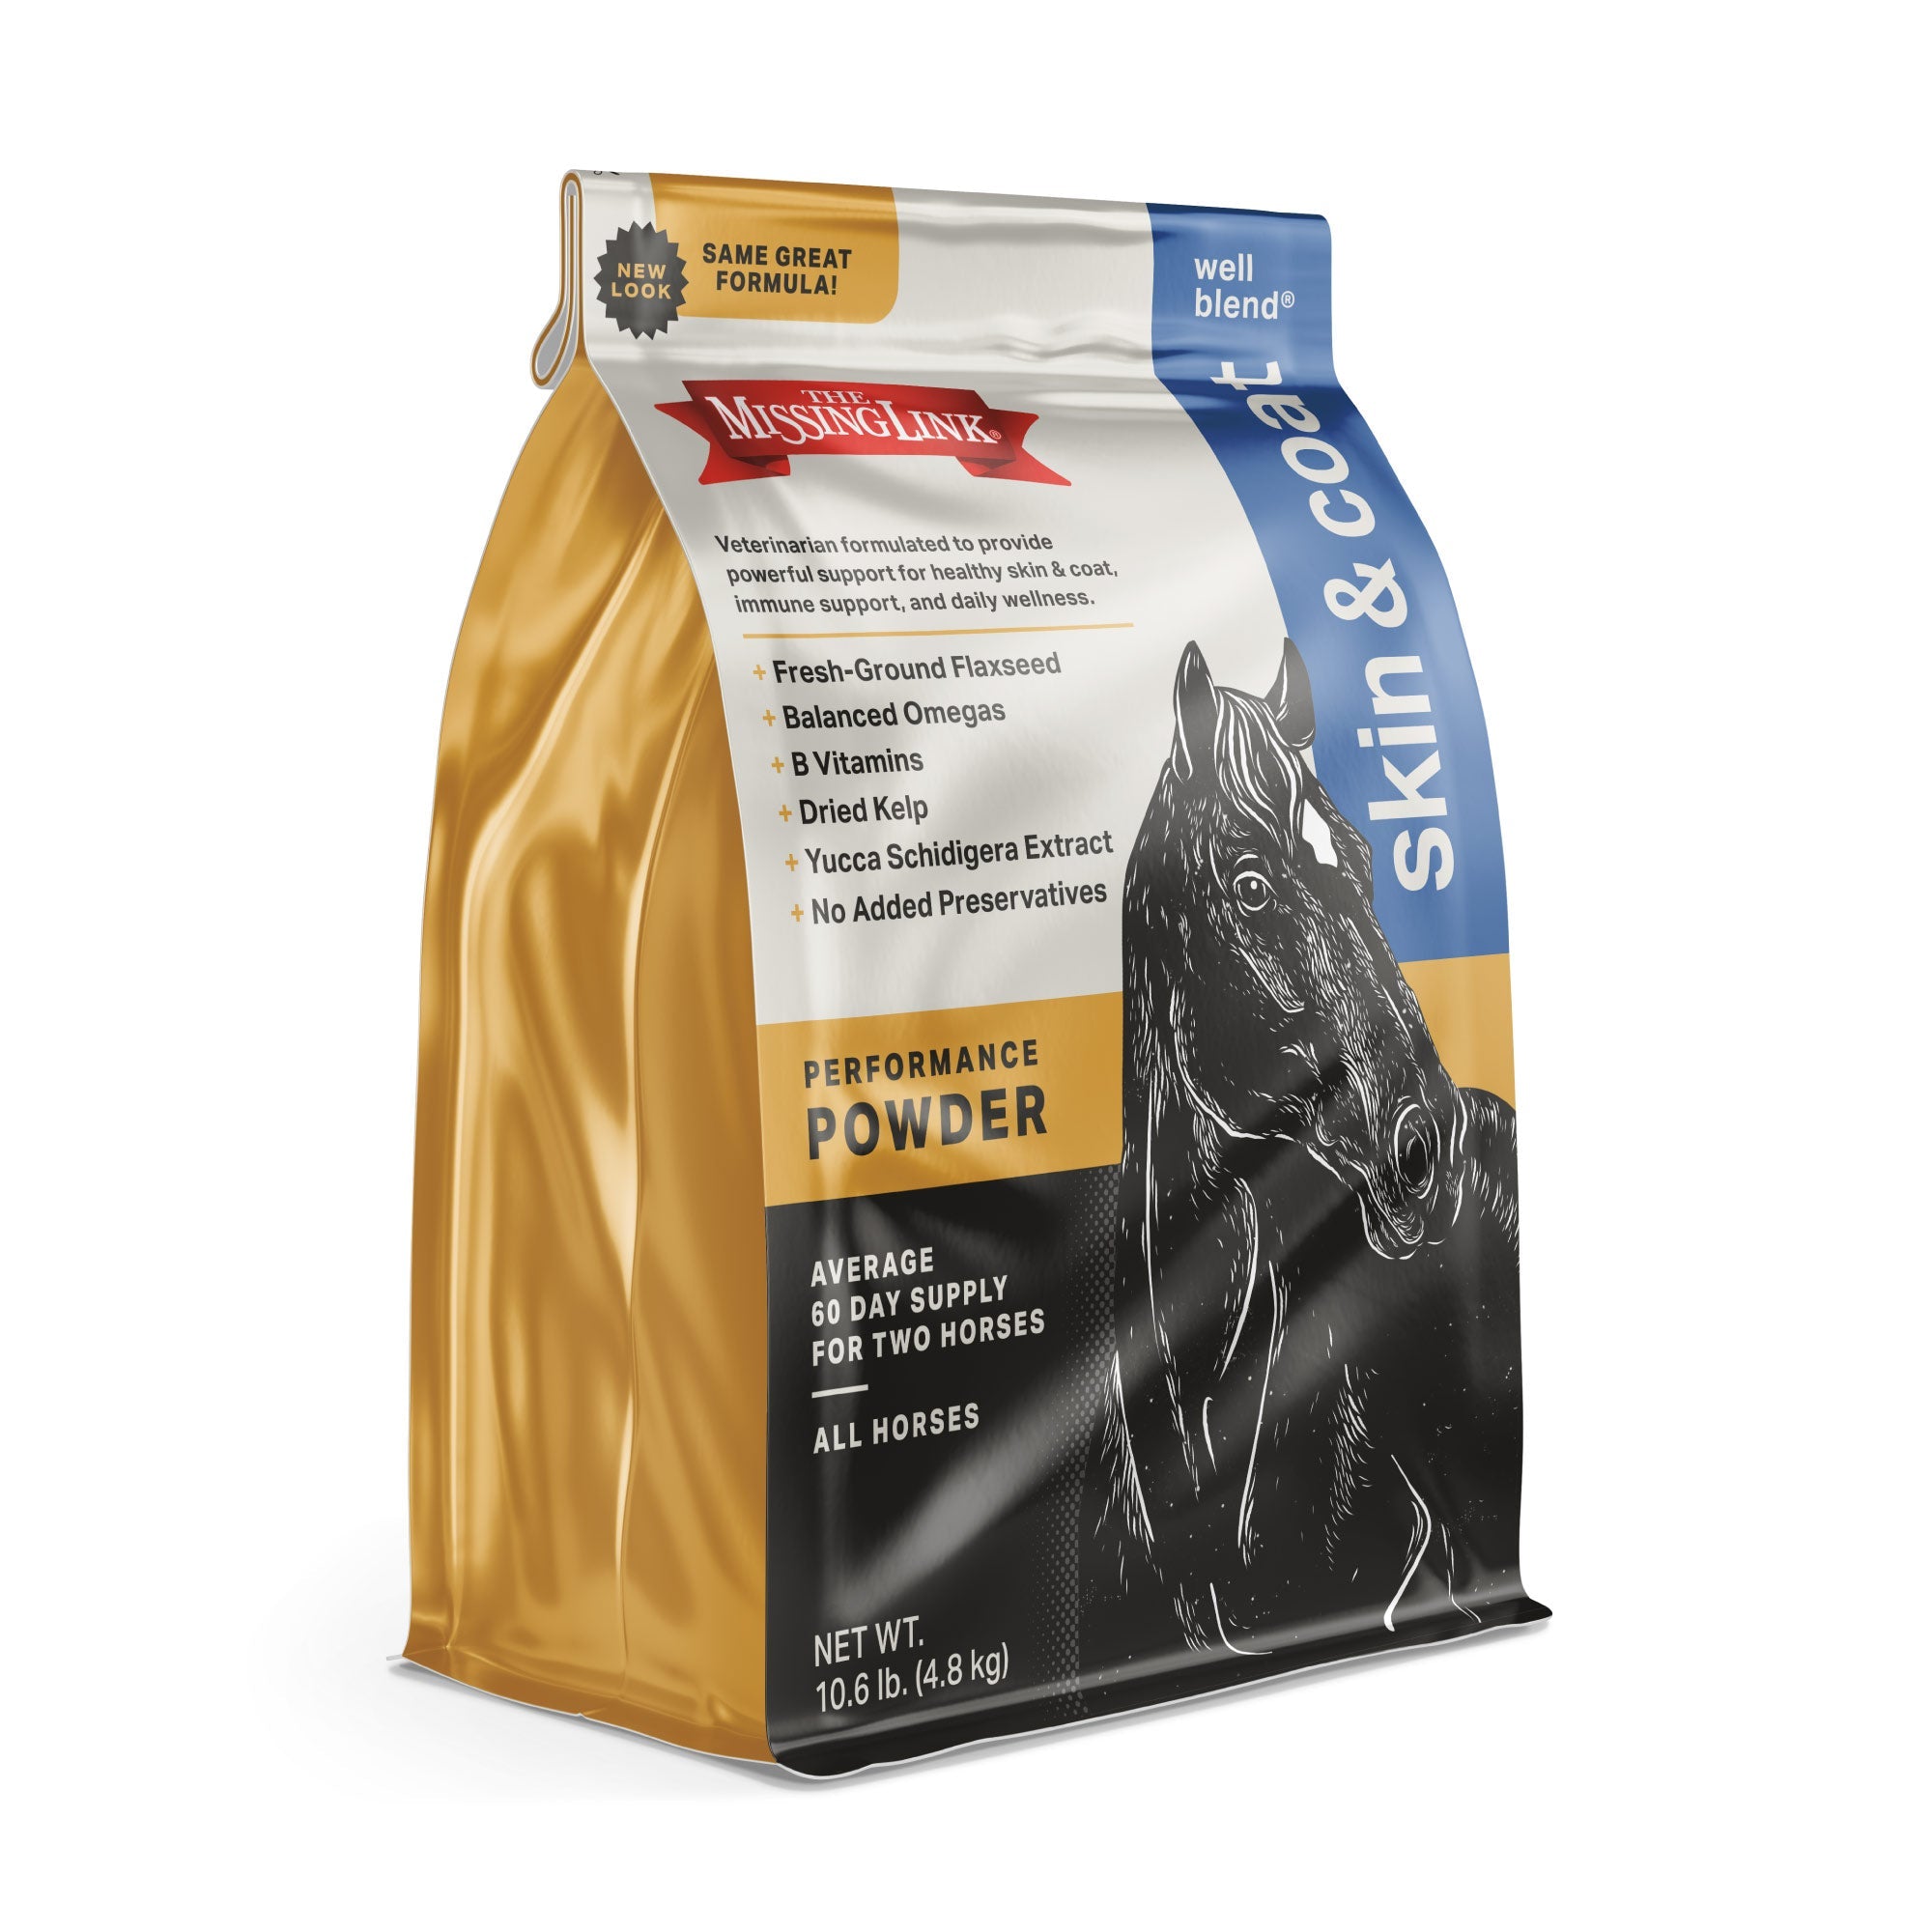 10.6 lb. bag 60 day supply of The Missing Link performance powder Well Blend Skin & Coat, new look, same great formula!